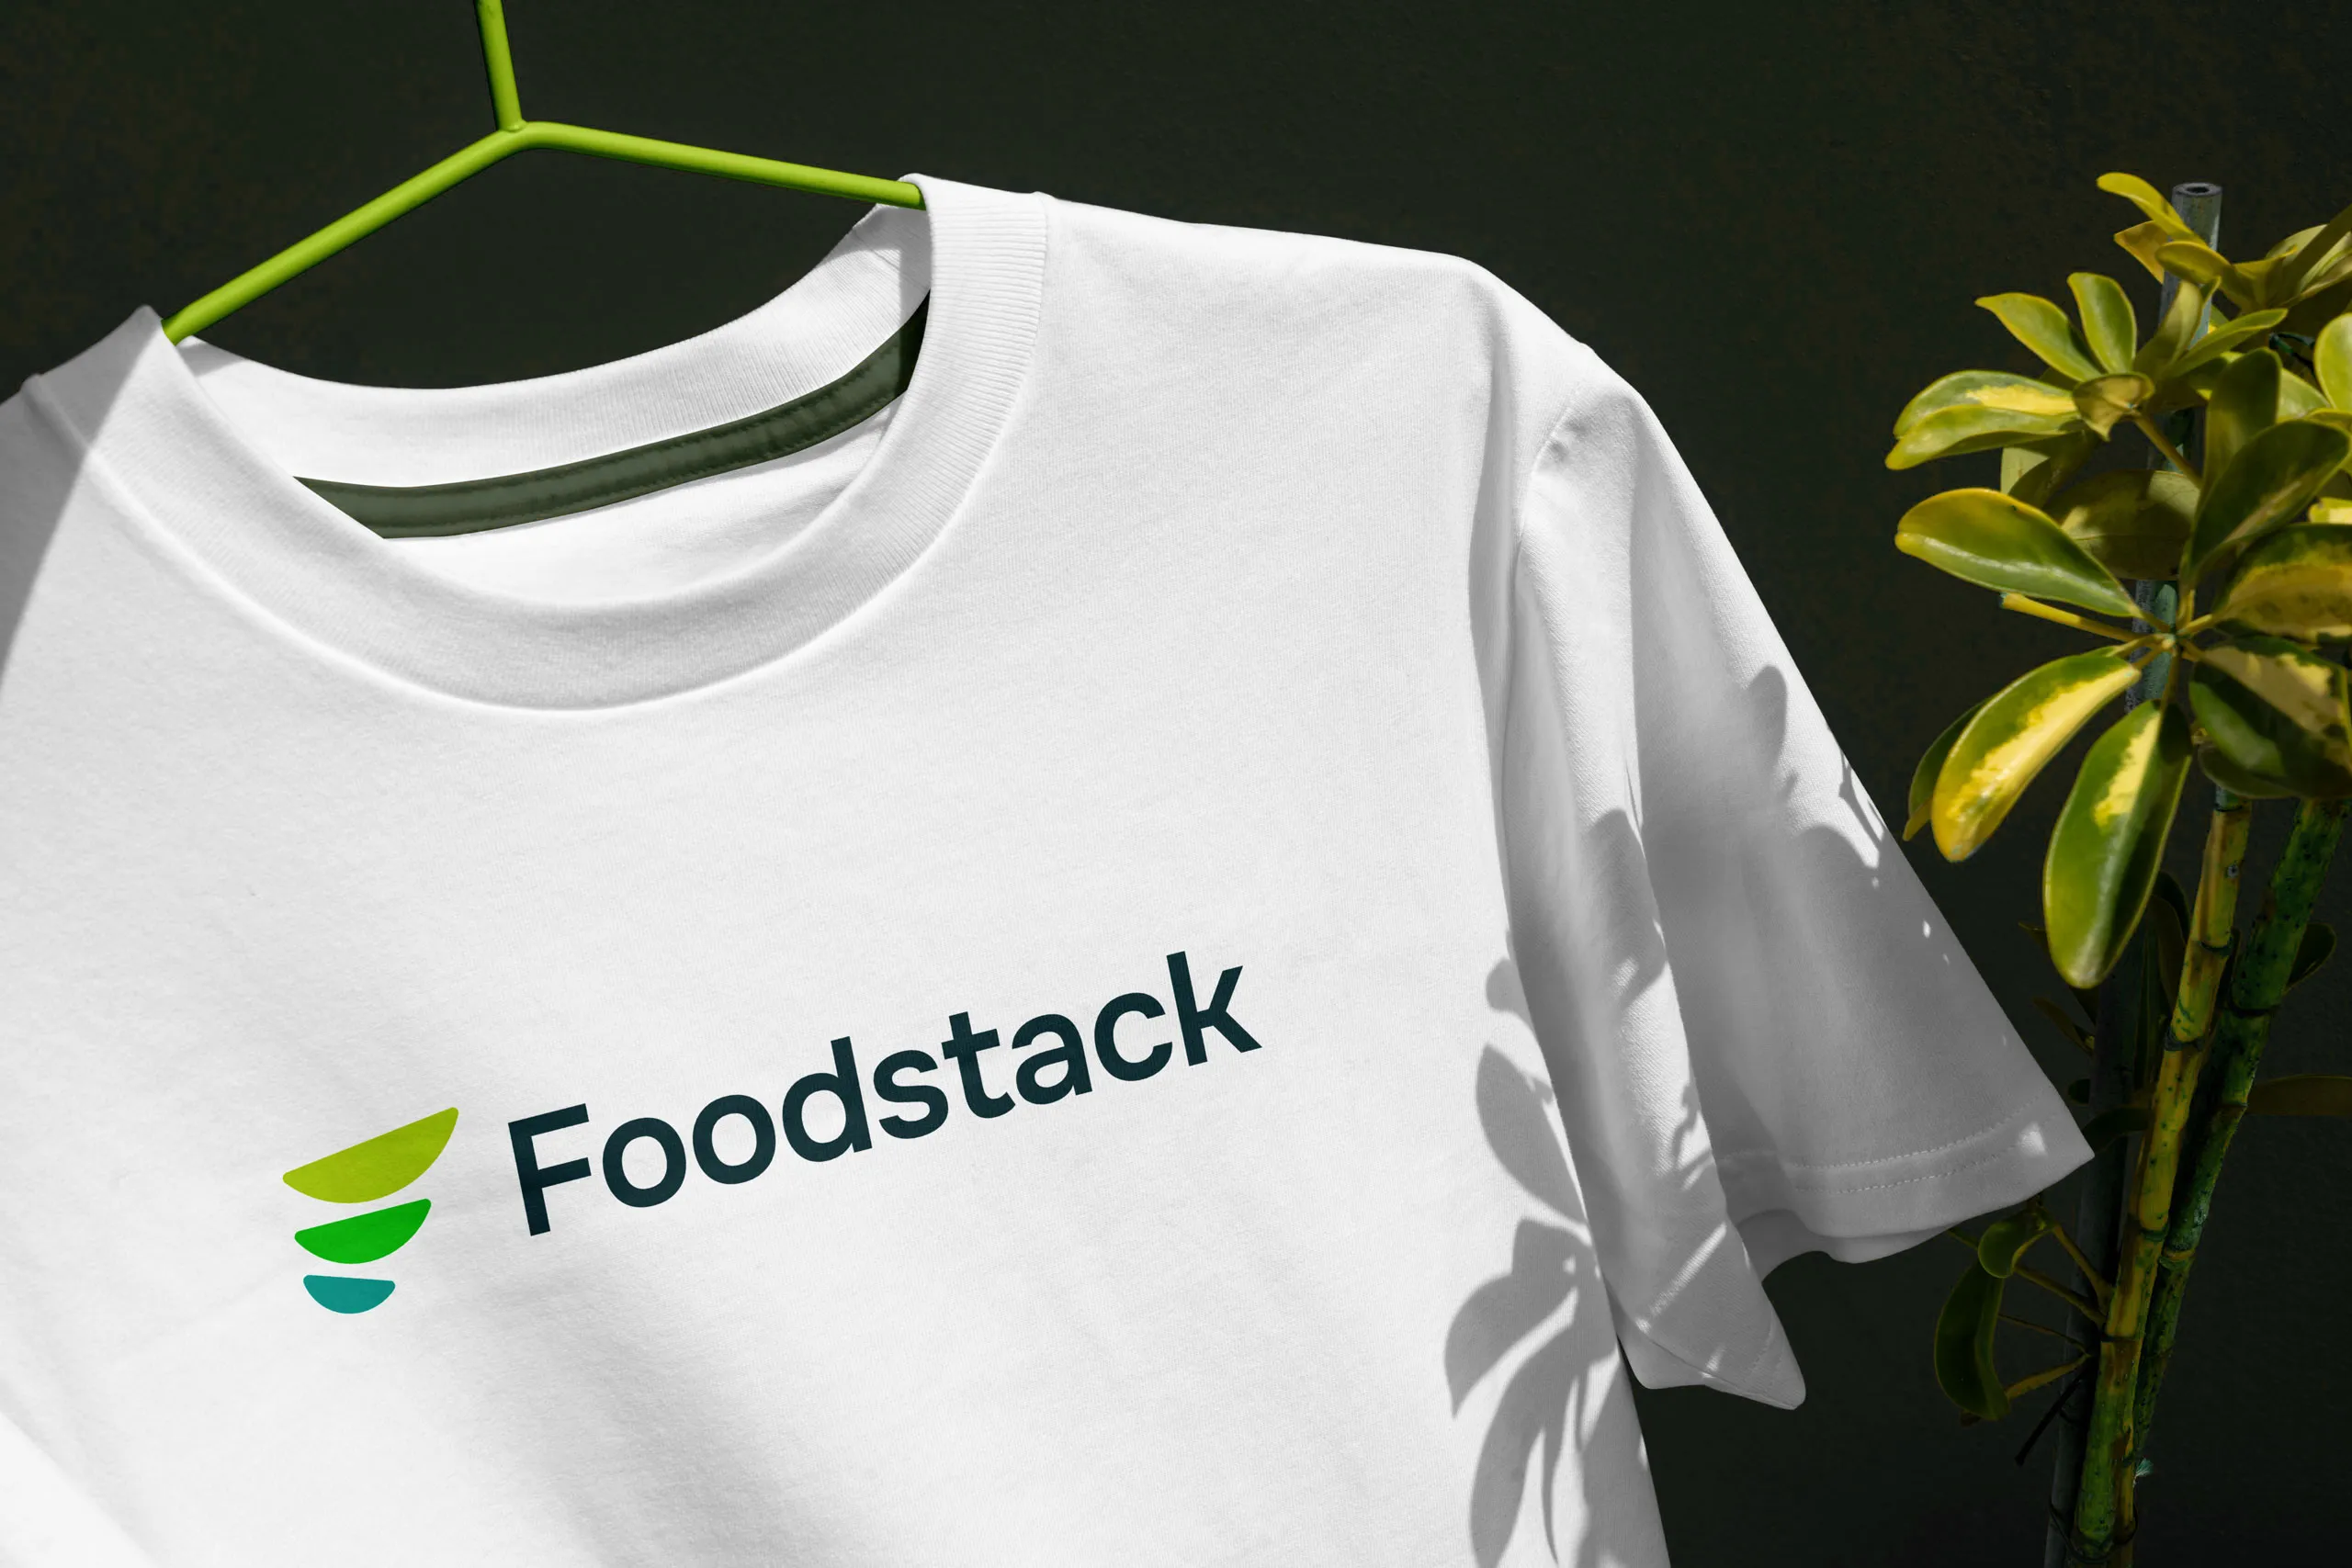 Mockup of the Foodstack logo on outdoor apparel, showing the brand in action.